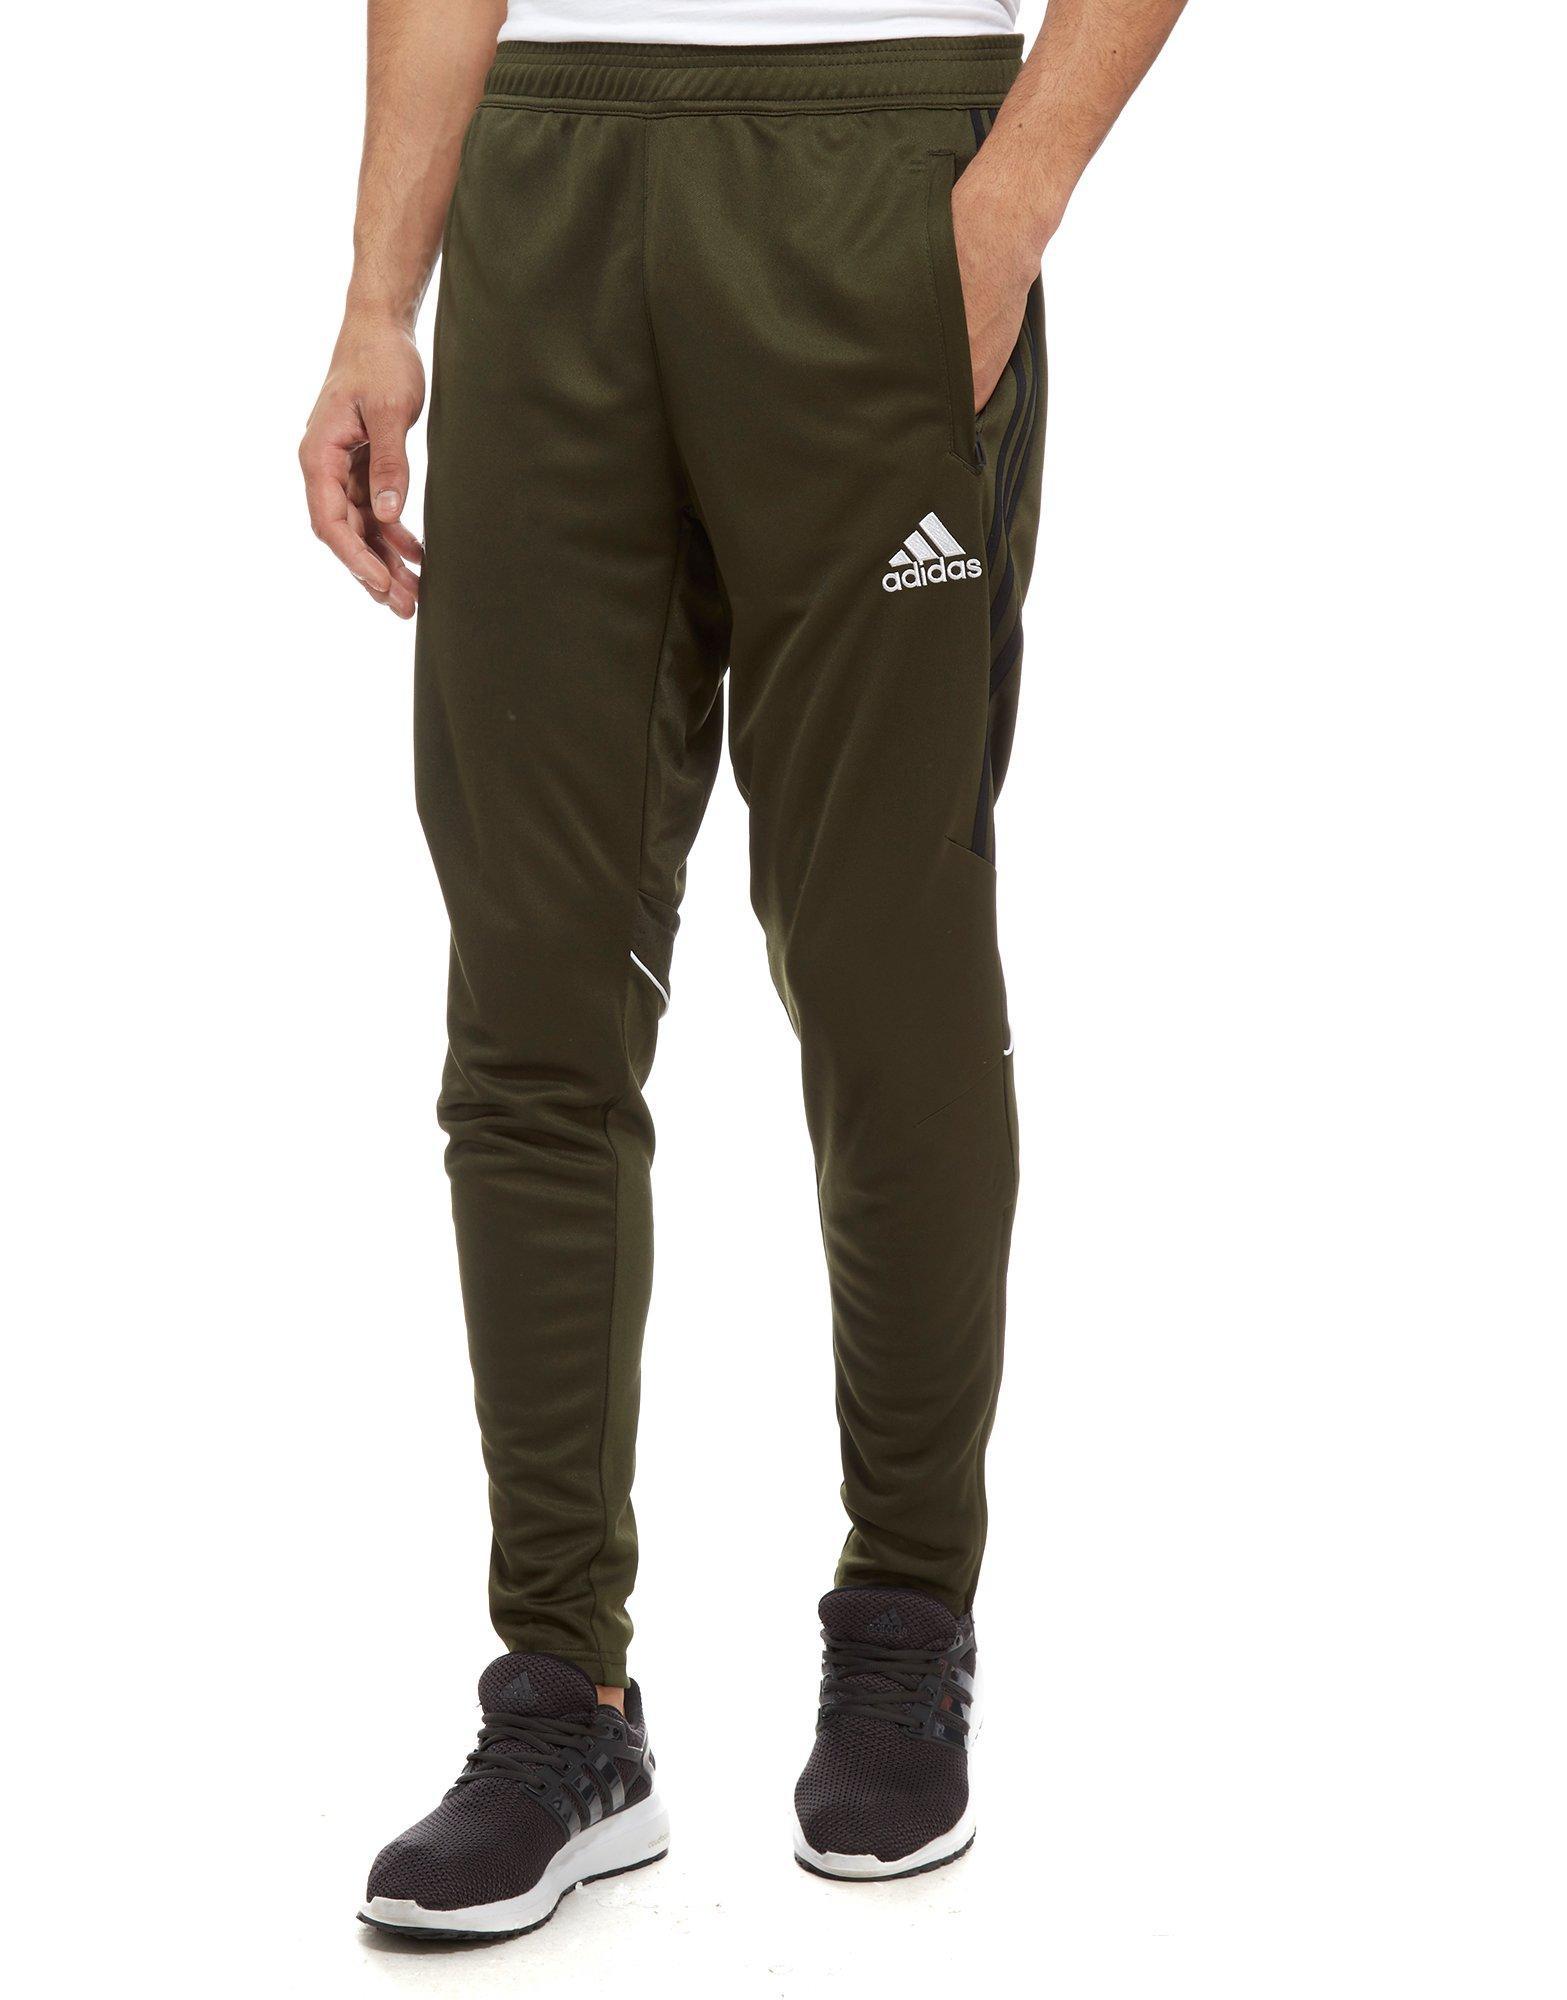 adidas Synthetic Tango Pant in Green 